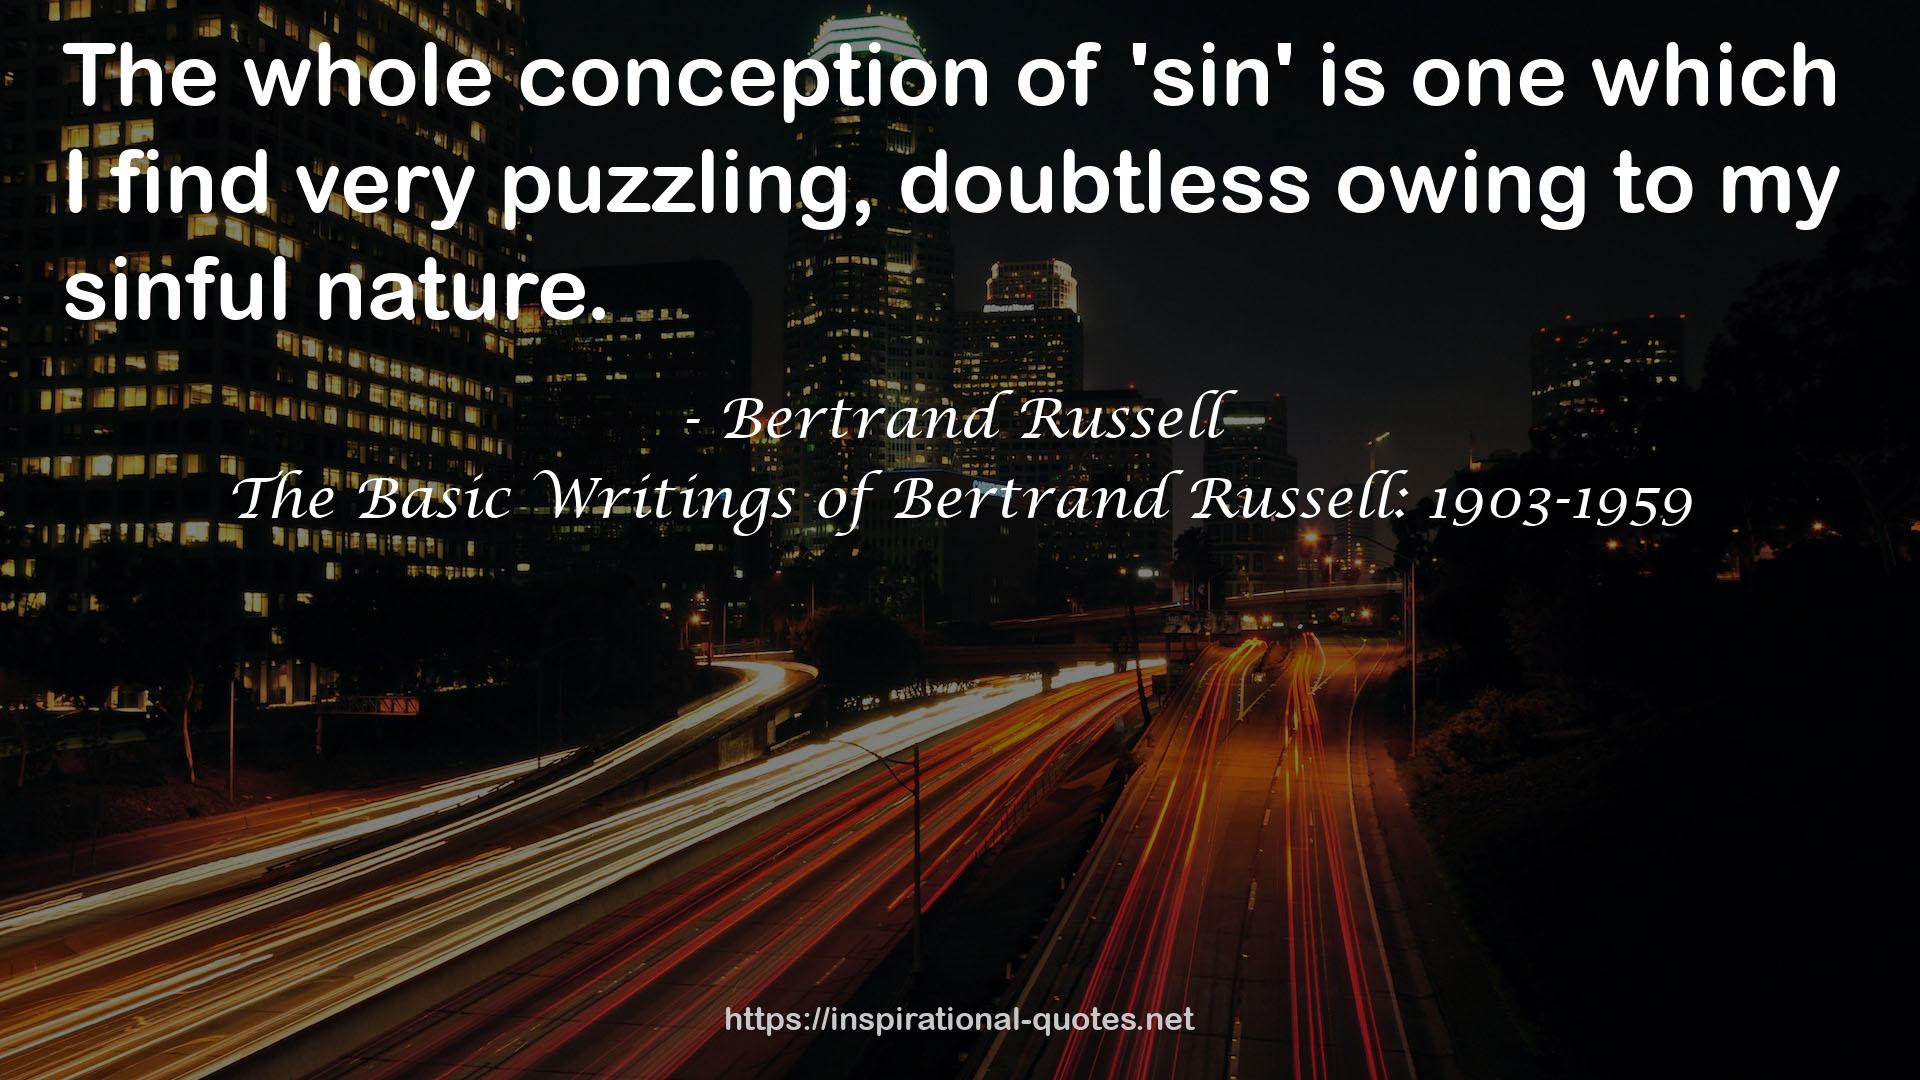 The Basic Writings of Bertrand Russell: 1903-1959 QUOTES